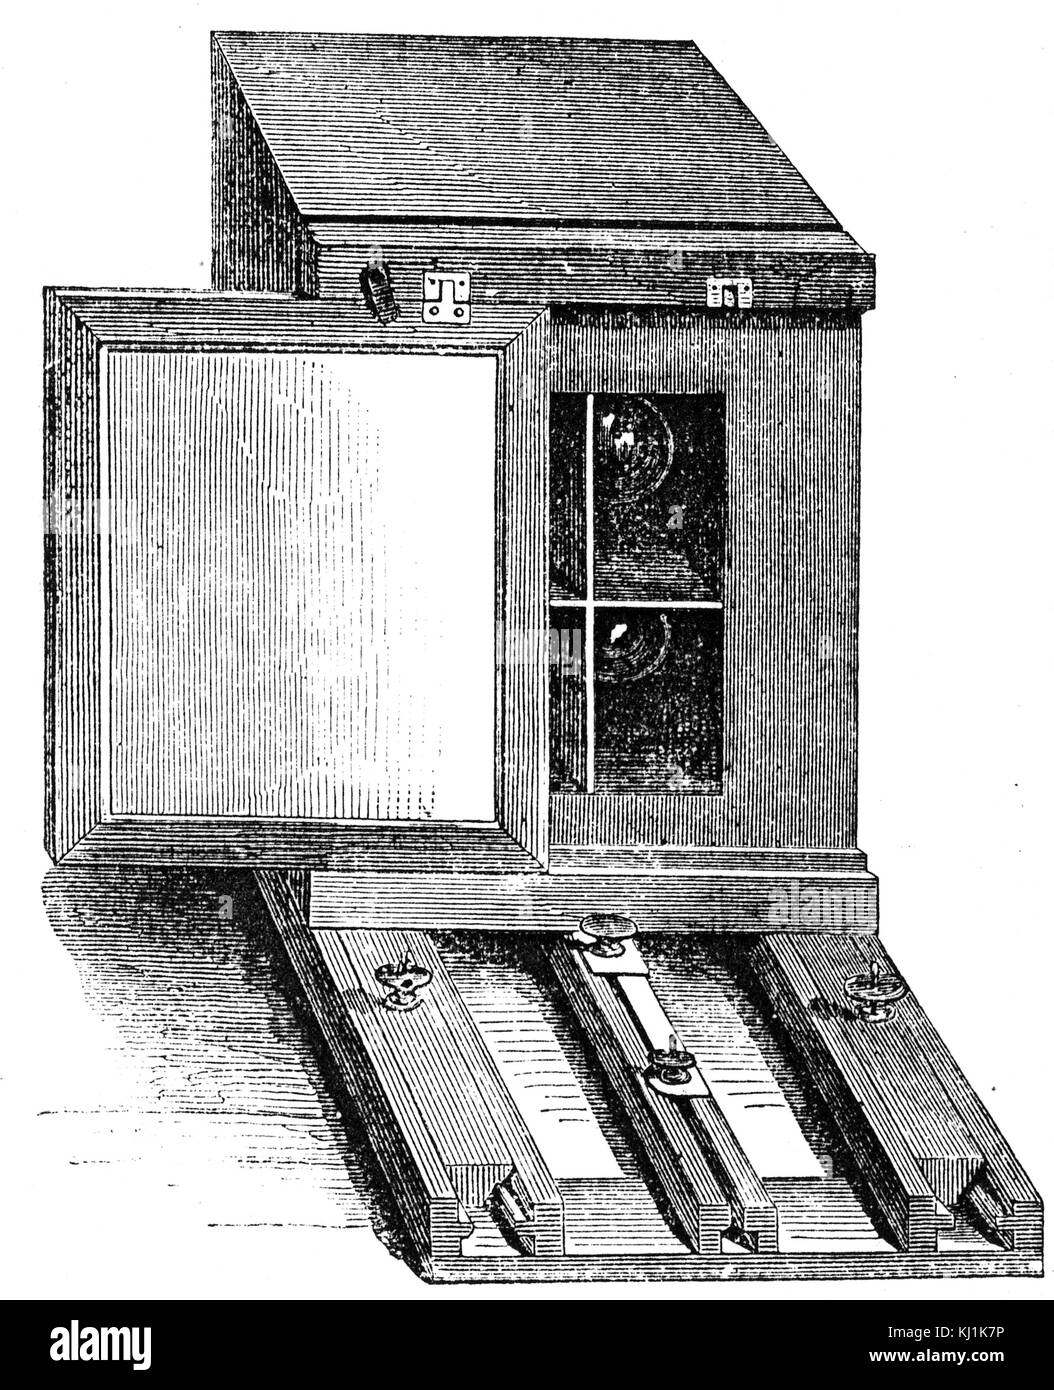 Engraving depicting a stereoscopic camera with a single shutter operating in front of both lenses. Dated 19th Century Stock Photo